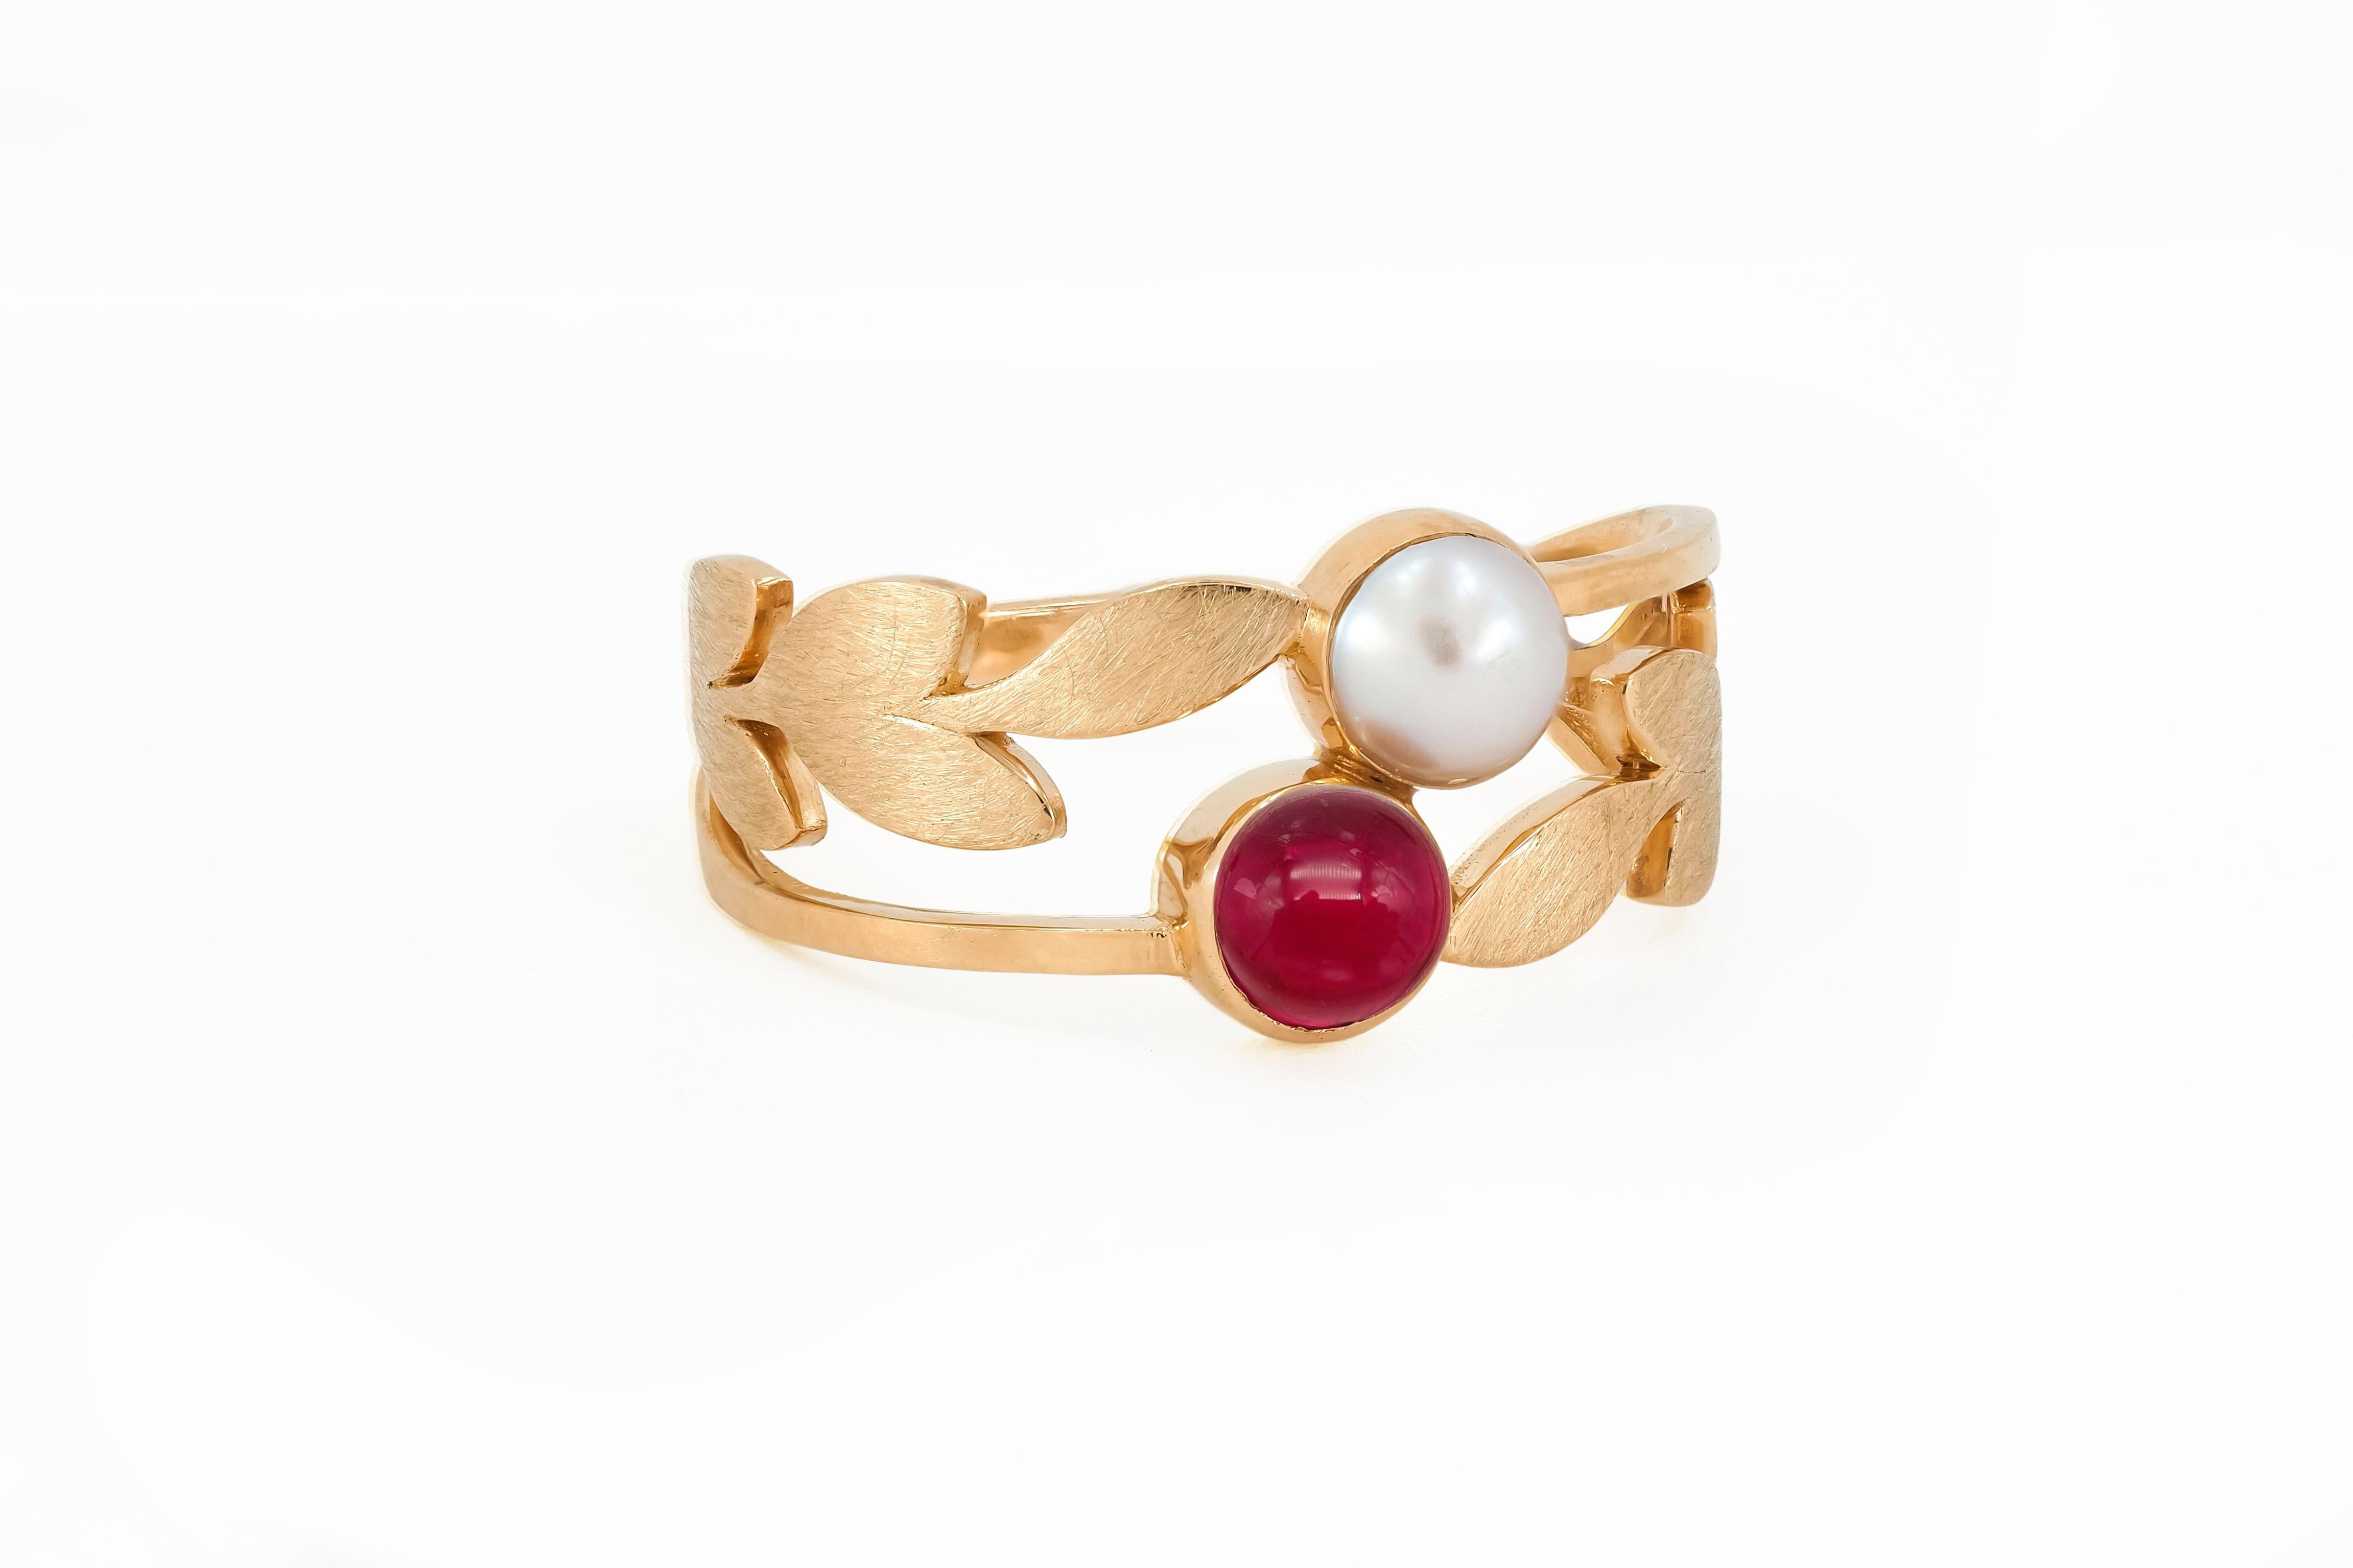 Modern 14k Gold Ring with Ruby and Pearl